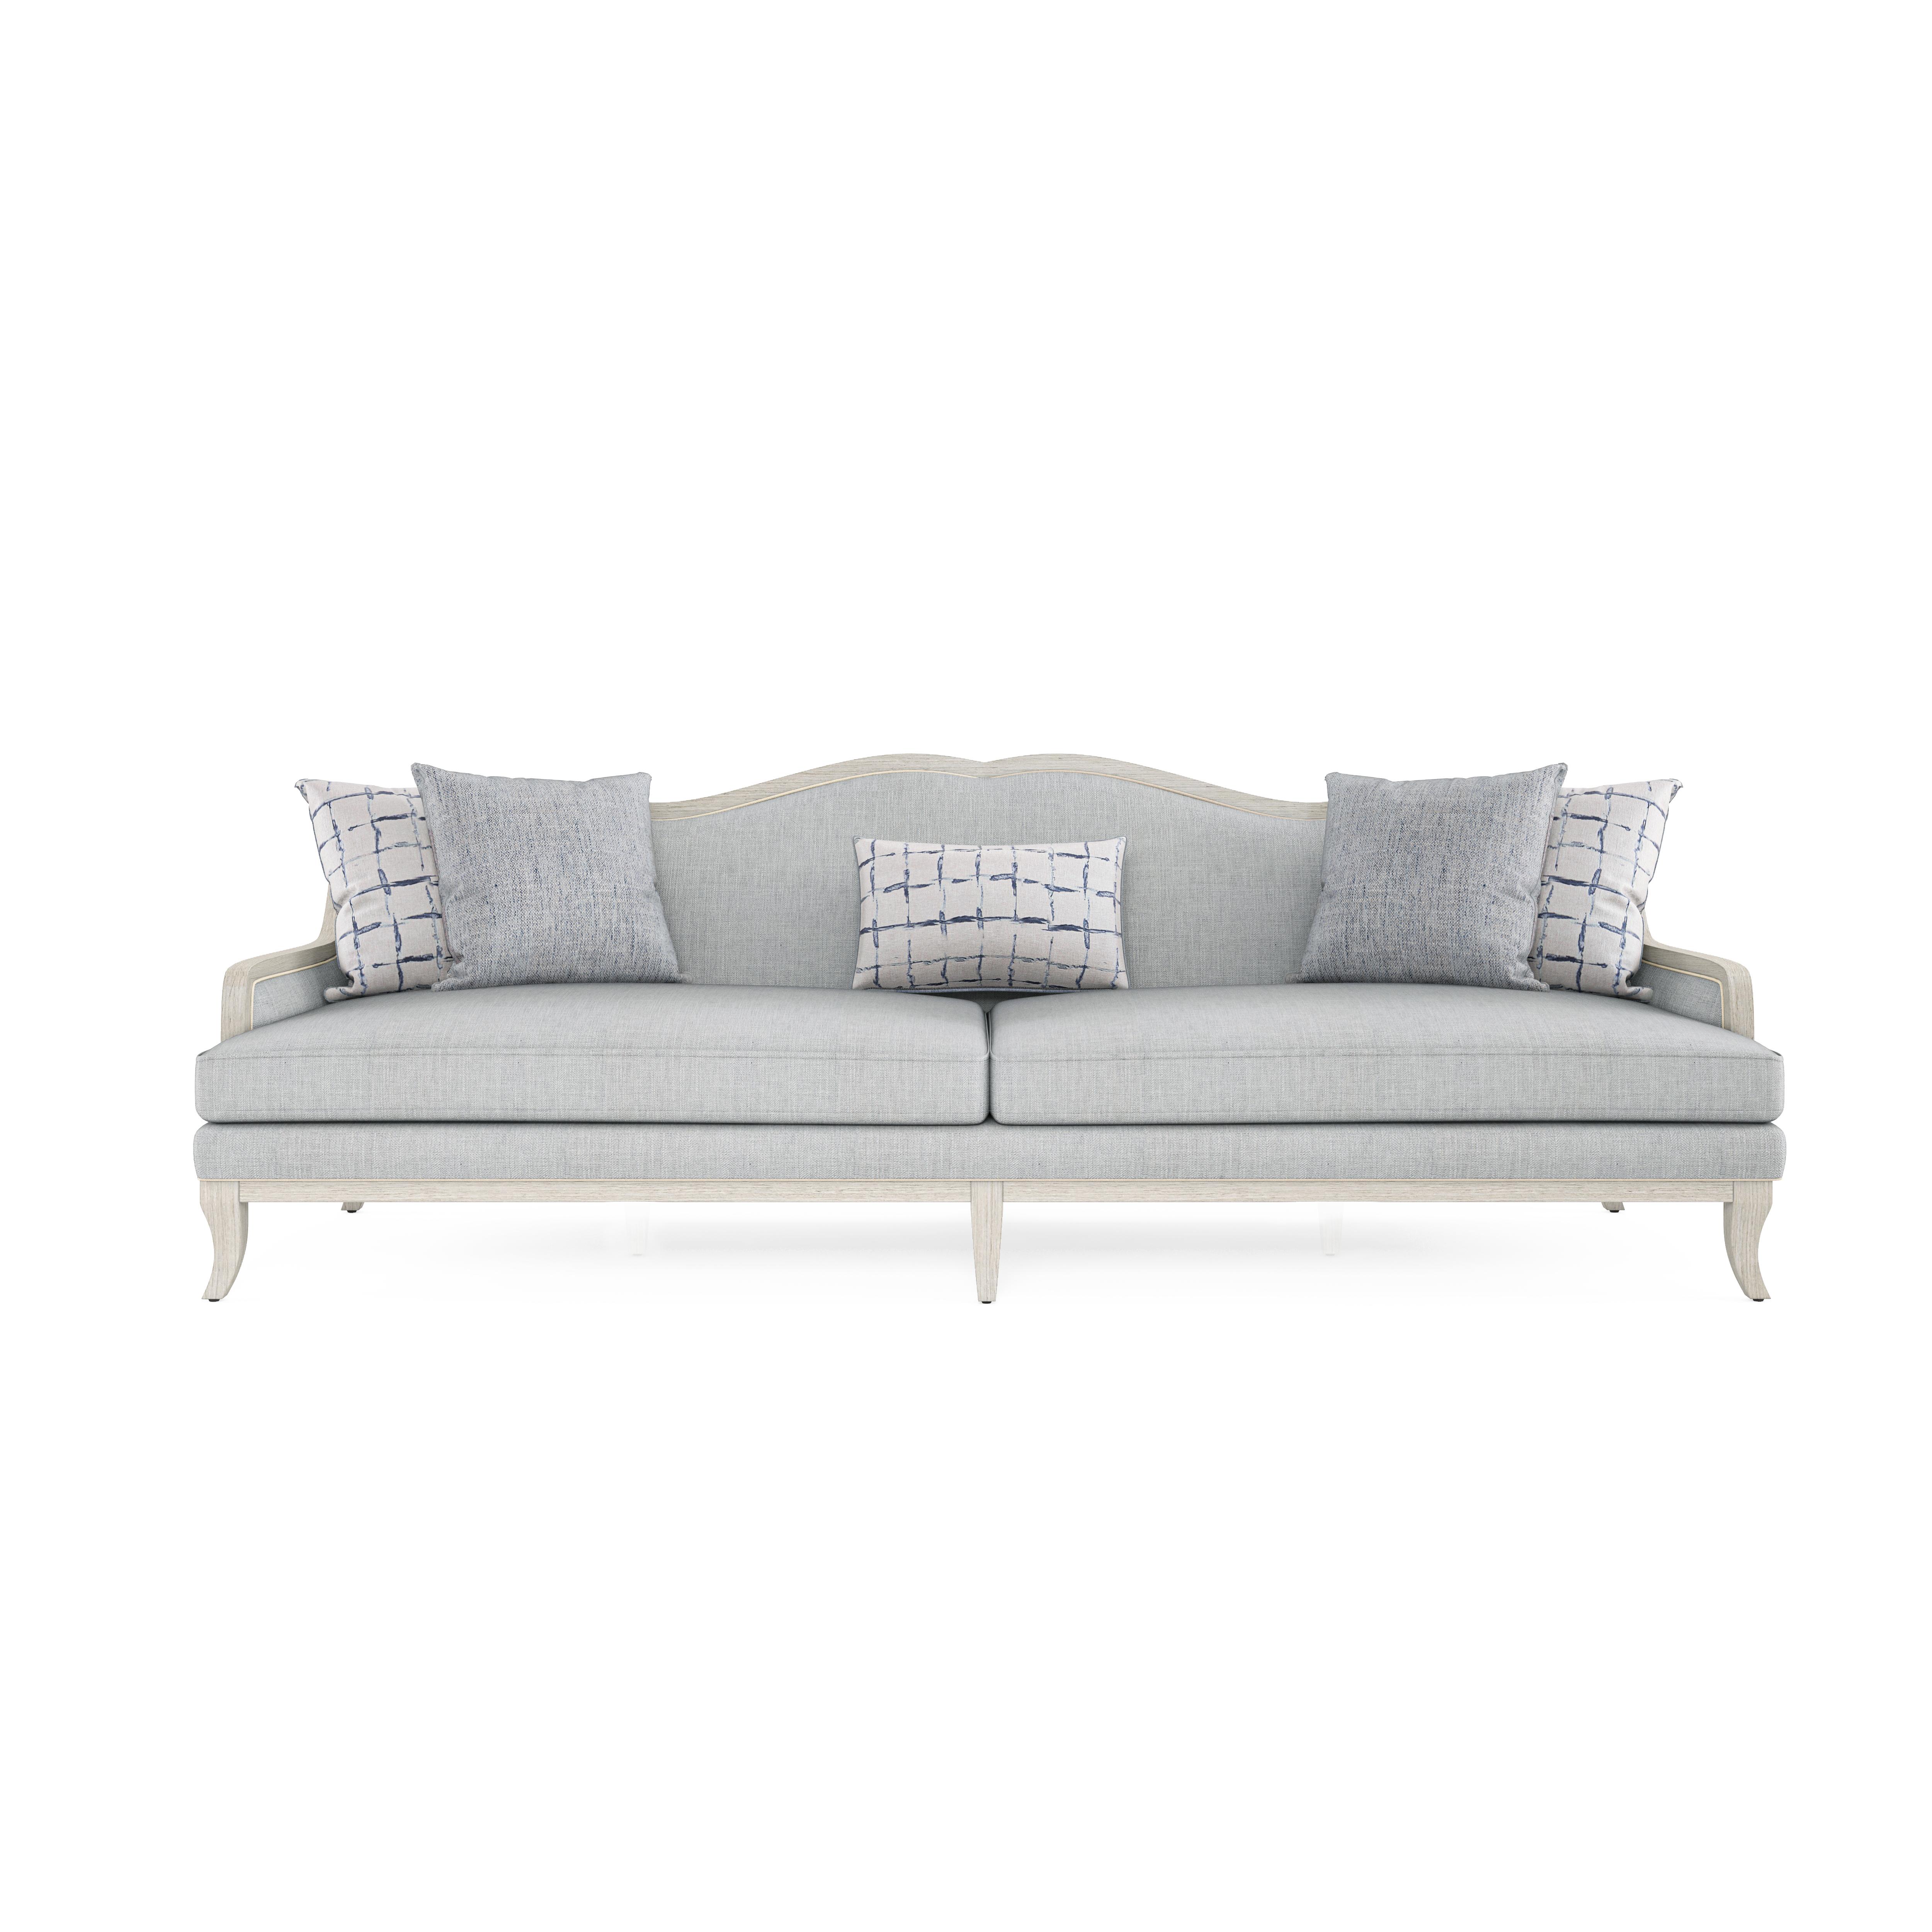 Classic, Traditional Sofa Assemblage 754521-5349AB in Mist Fabric